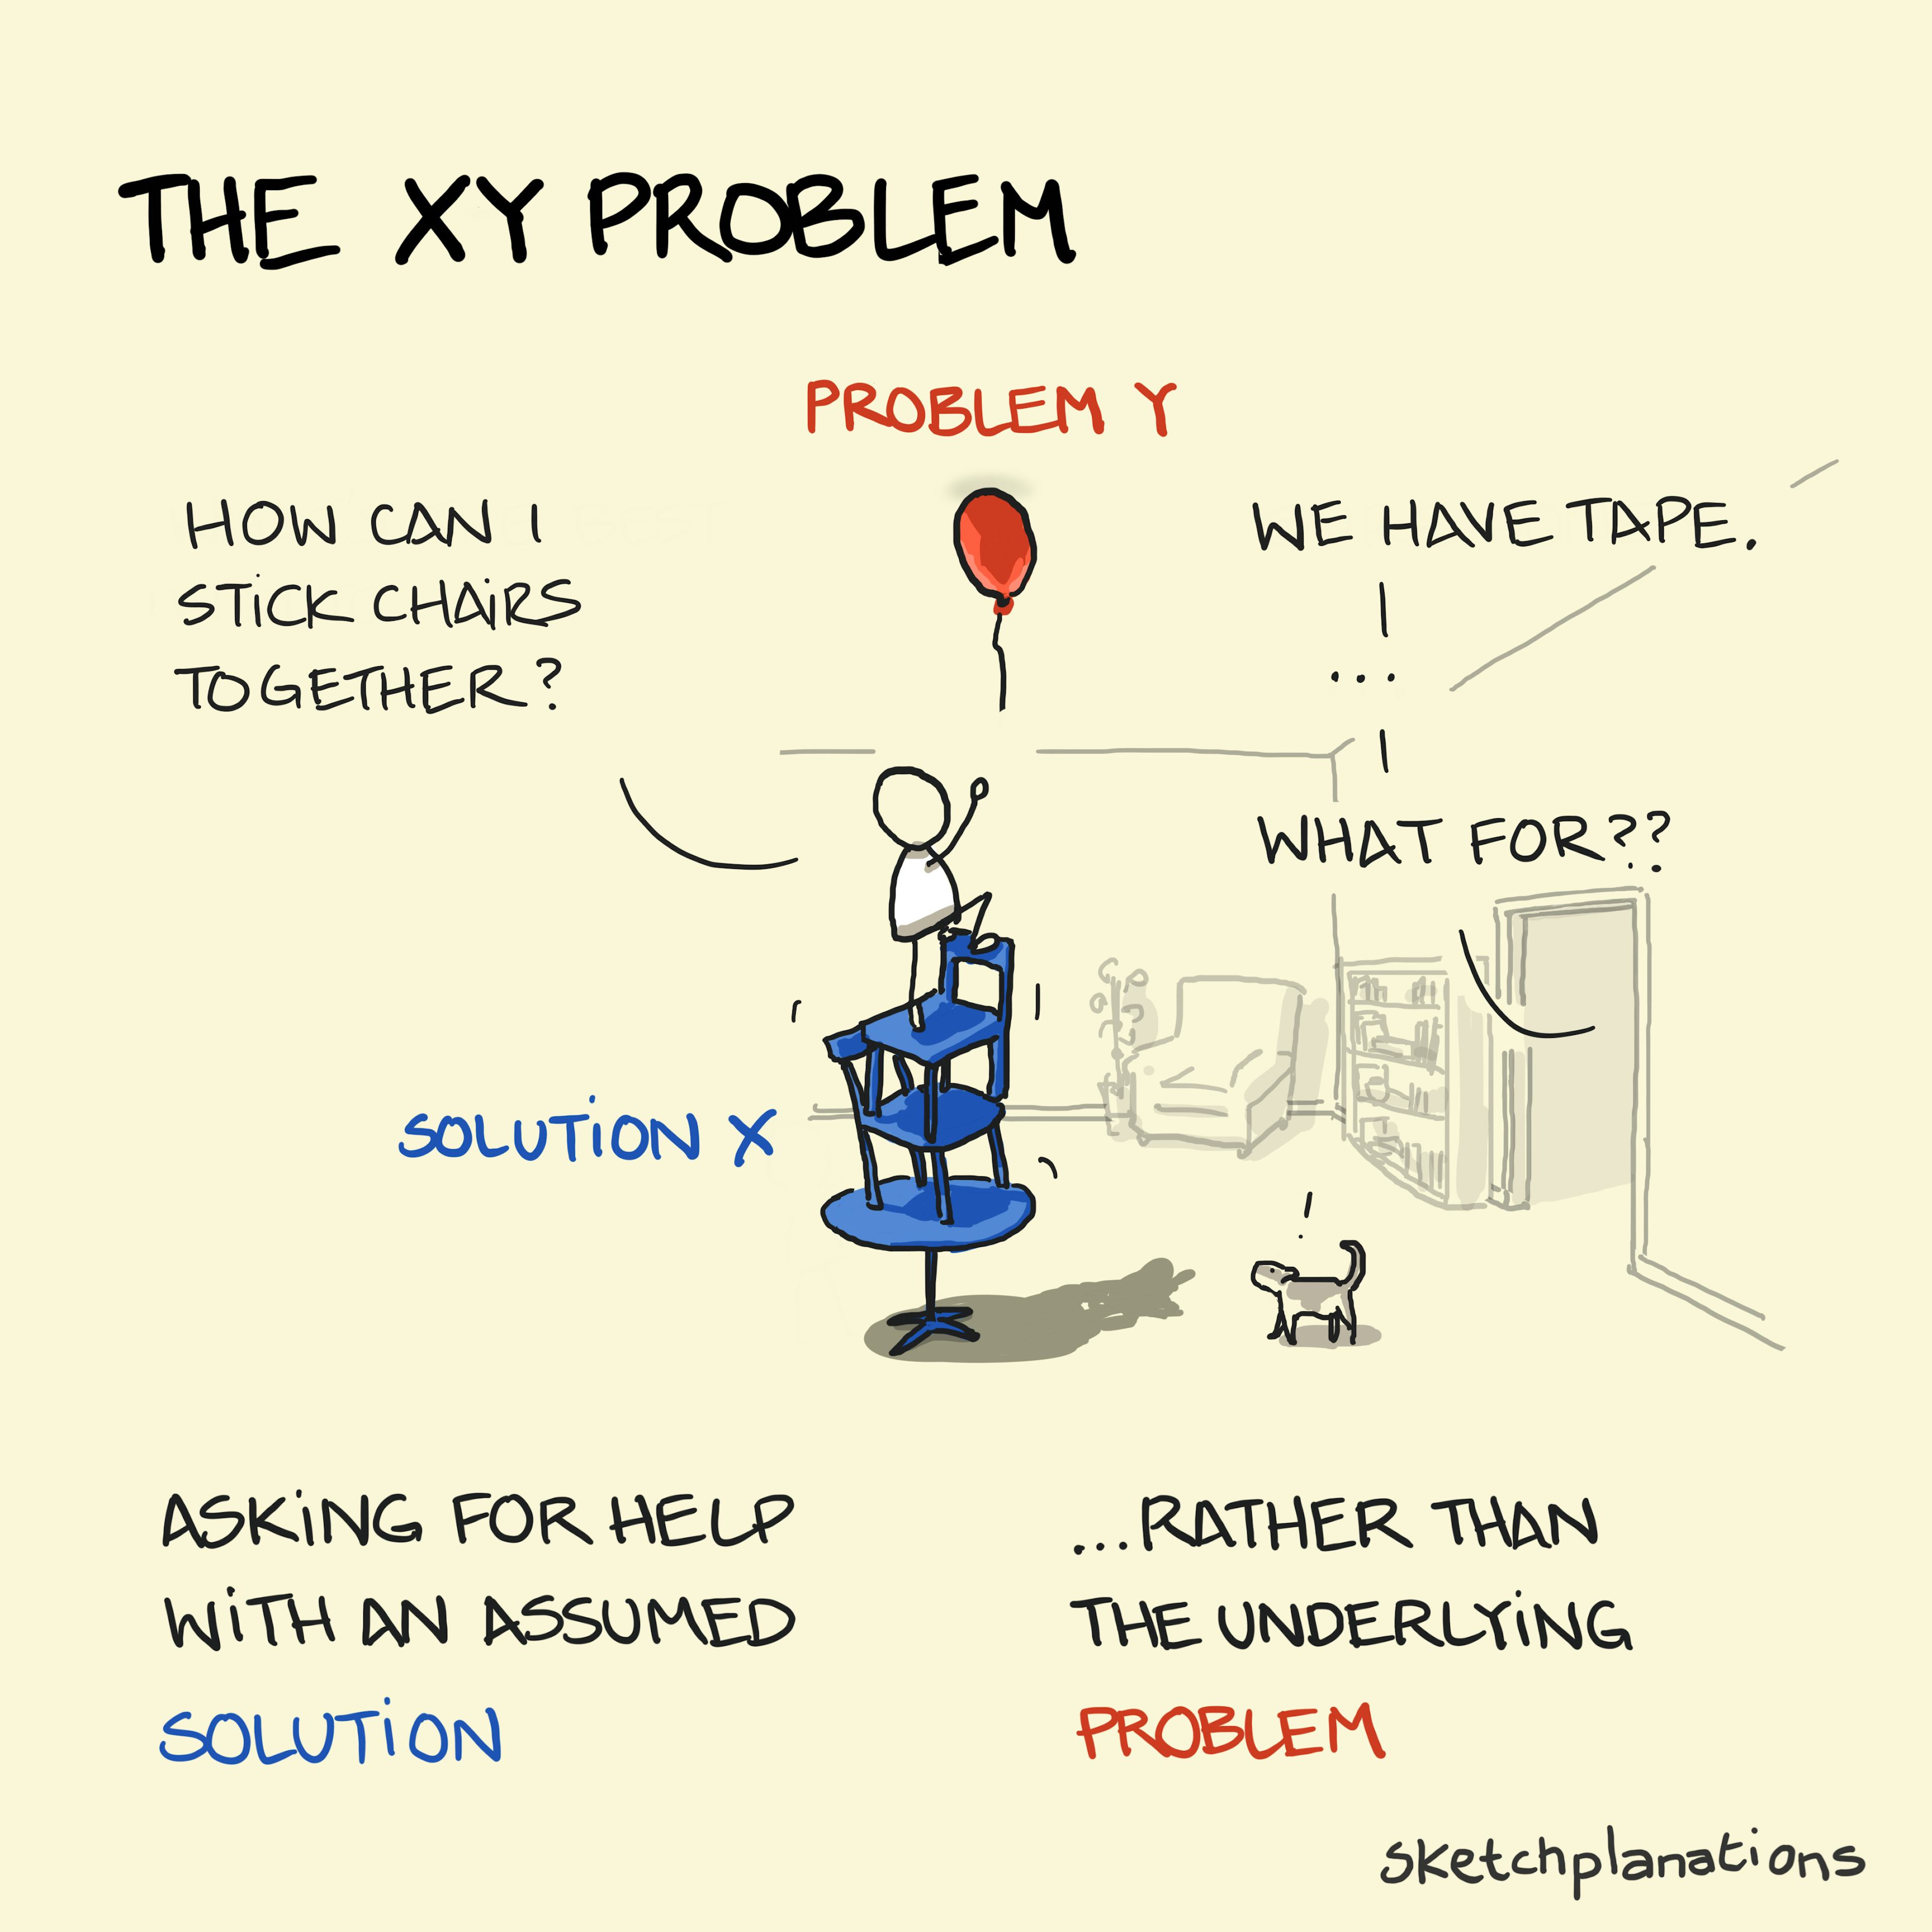 The XY Problem (or X-Y Problem): a child tries to reach a balloon by precariously stacking chairsand asks how they can stick them together to someone outside of the room who, eventually, wonders what for?